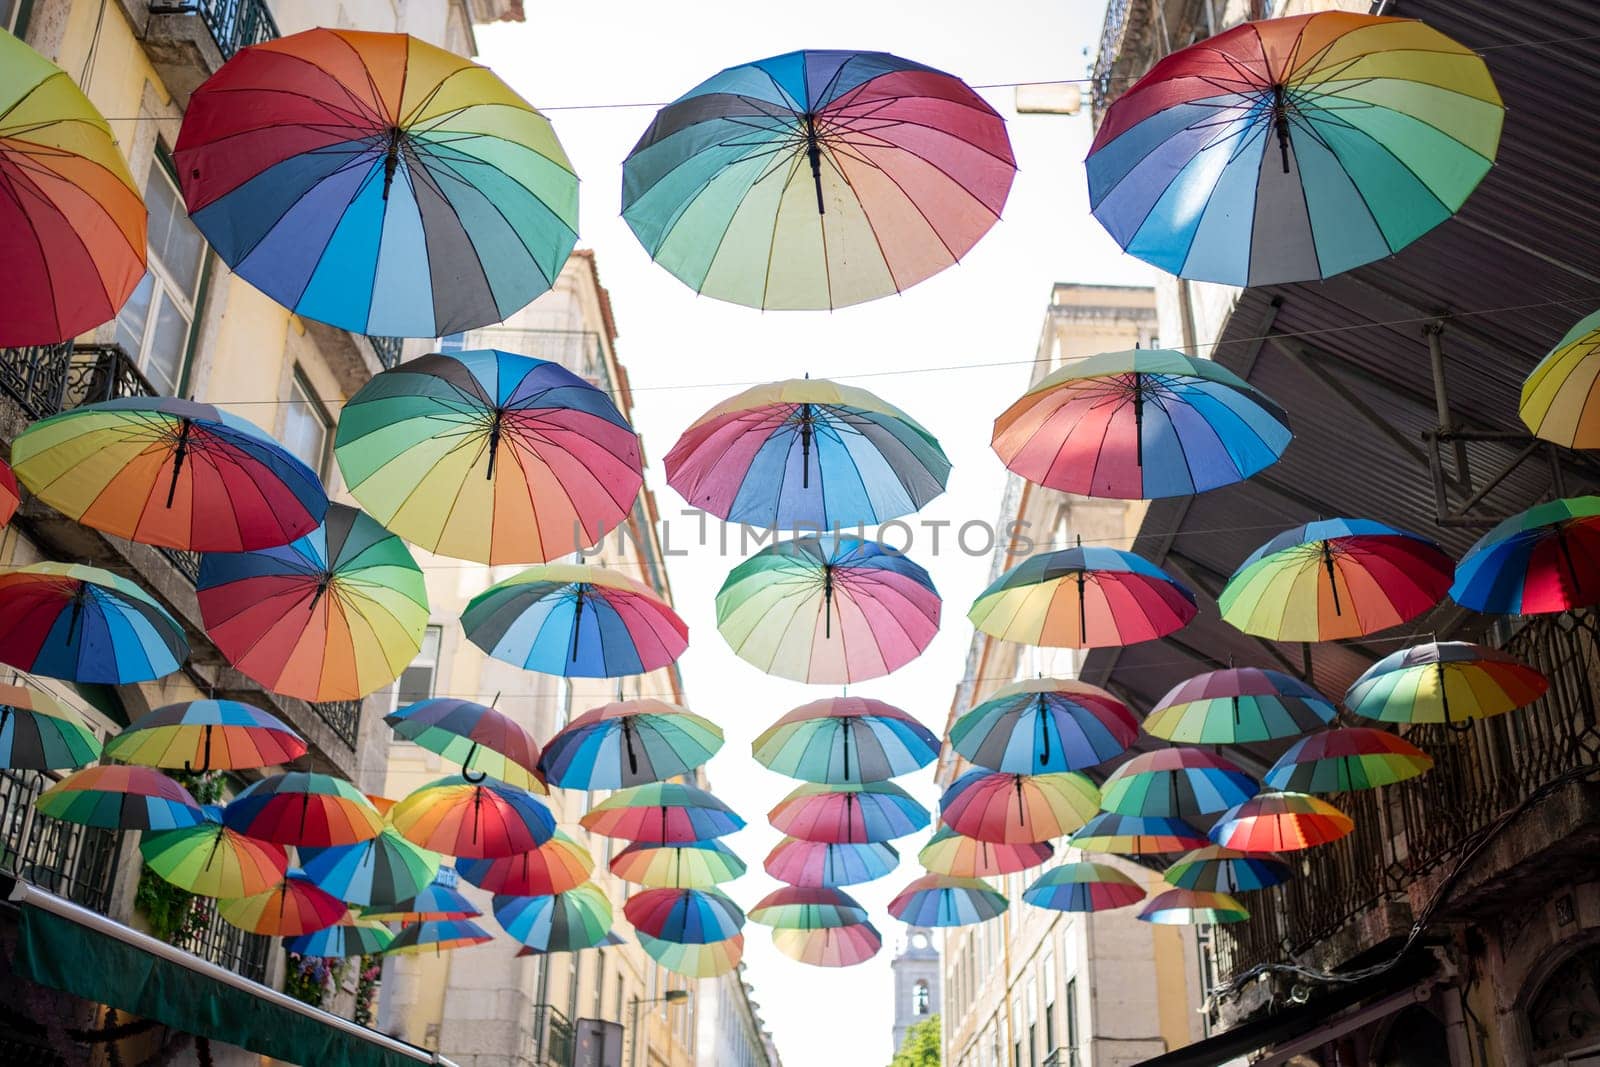 Colorful umbrellas adorn the street, creating vibrant display against blue sky. Many rainbow parasols contribute to festive street decorations, especially during Pride Month.